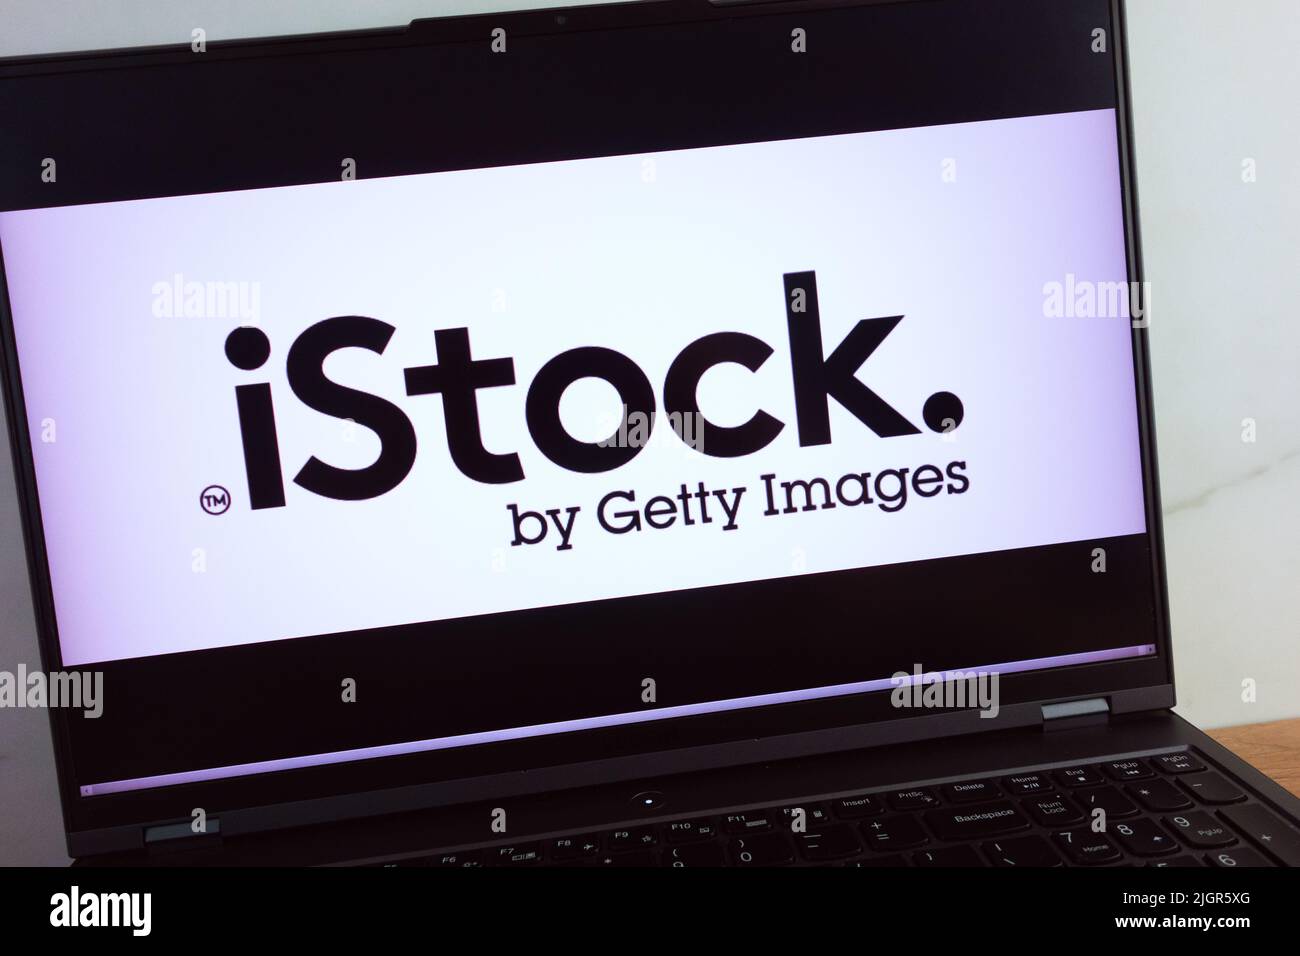 KONSKIE, POLAND - July 11, 2022: iStock by Getty Images stock photography service logo displayed on laptop computer screen Stock Photo